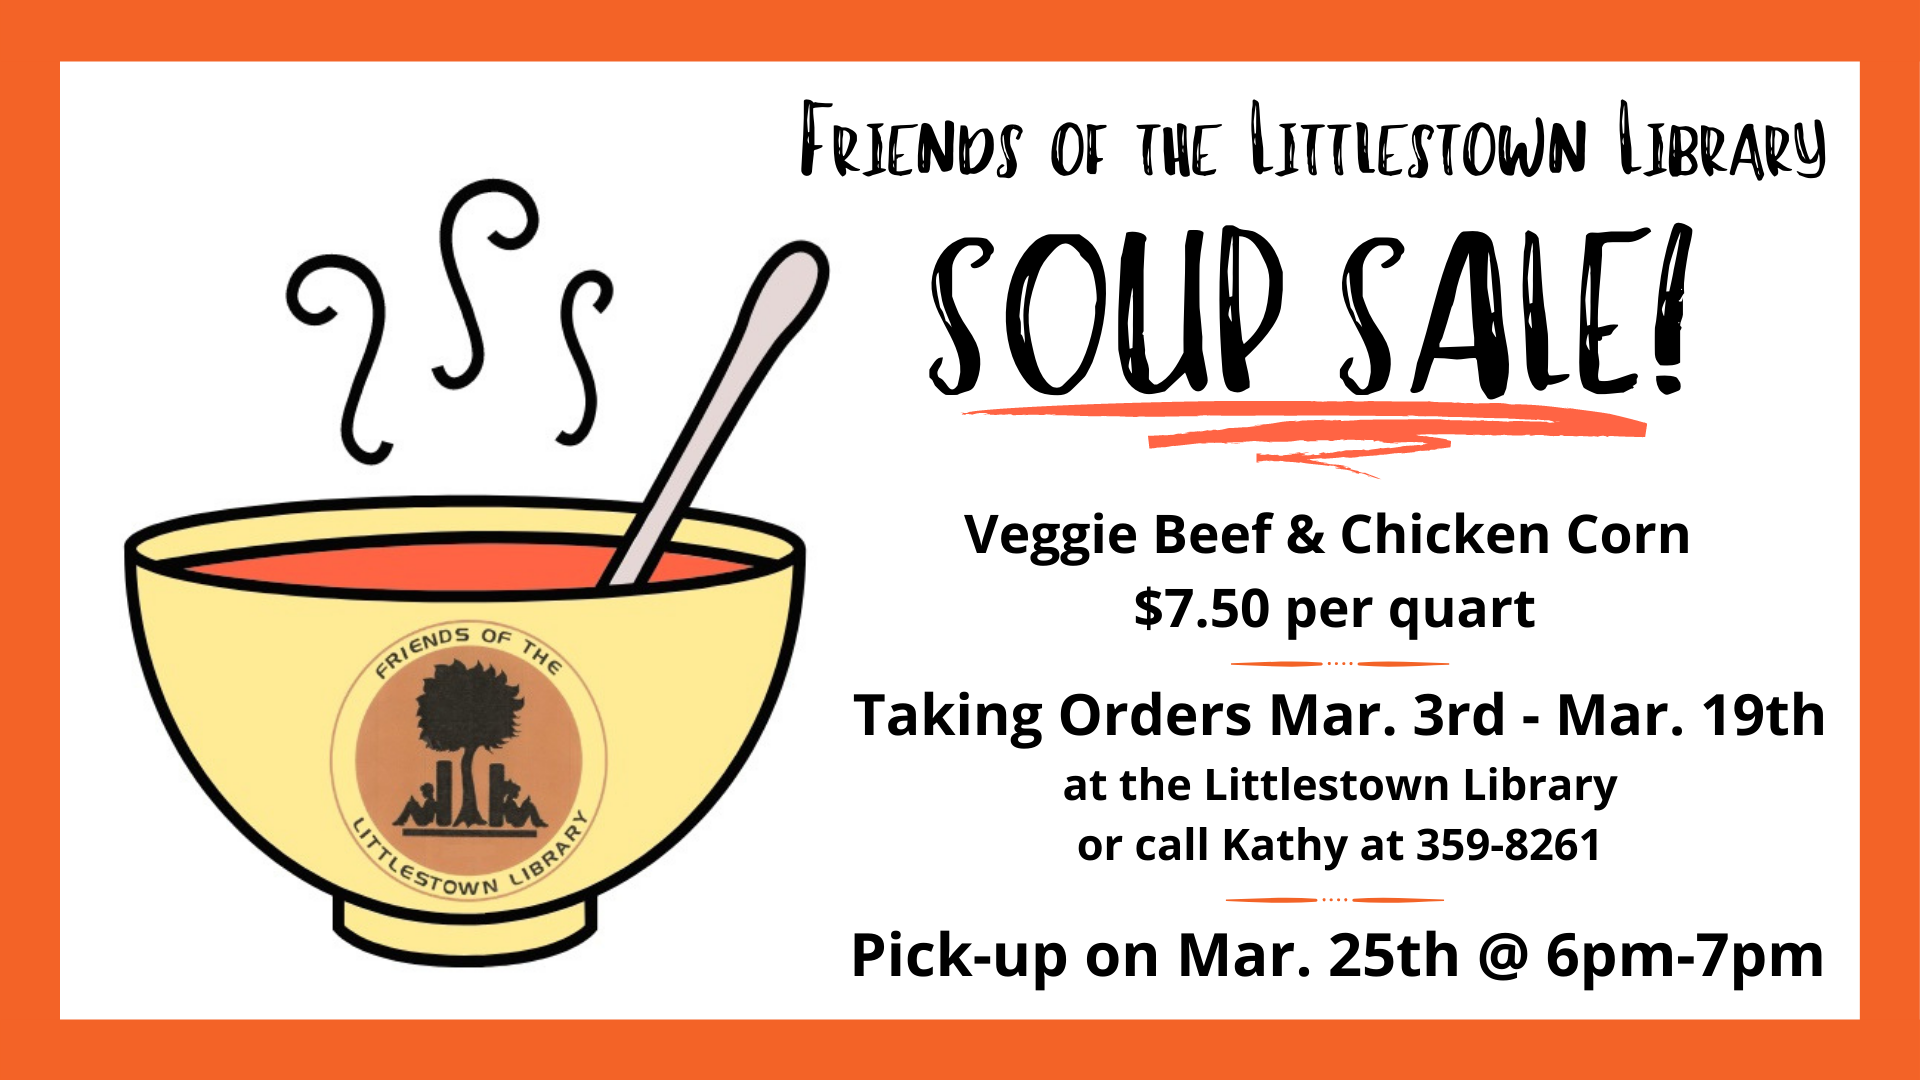 Friends of the Littlestown Library Soup Sale! Orders open March 3rd through March 19th. Pickup is from 6:00pm until 7:00pm on March 25th. Flavors are Chicken Corn and Vegetable Beef for $7.50 per quart.